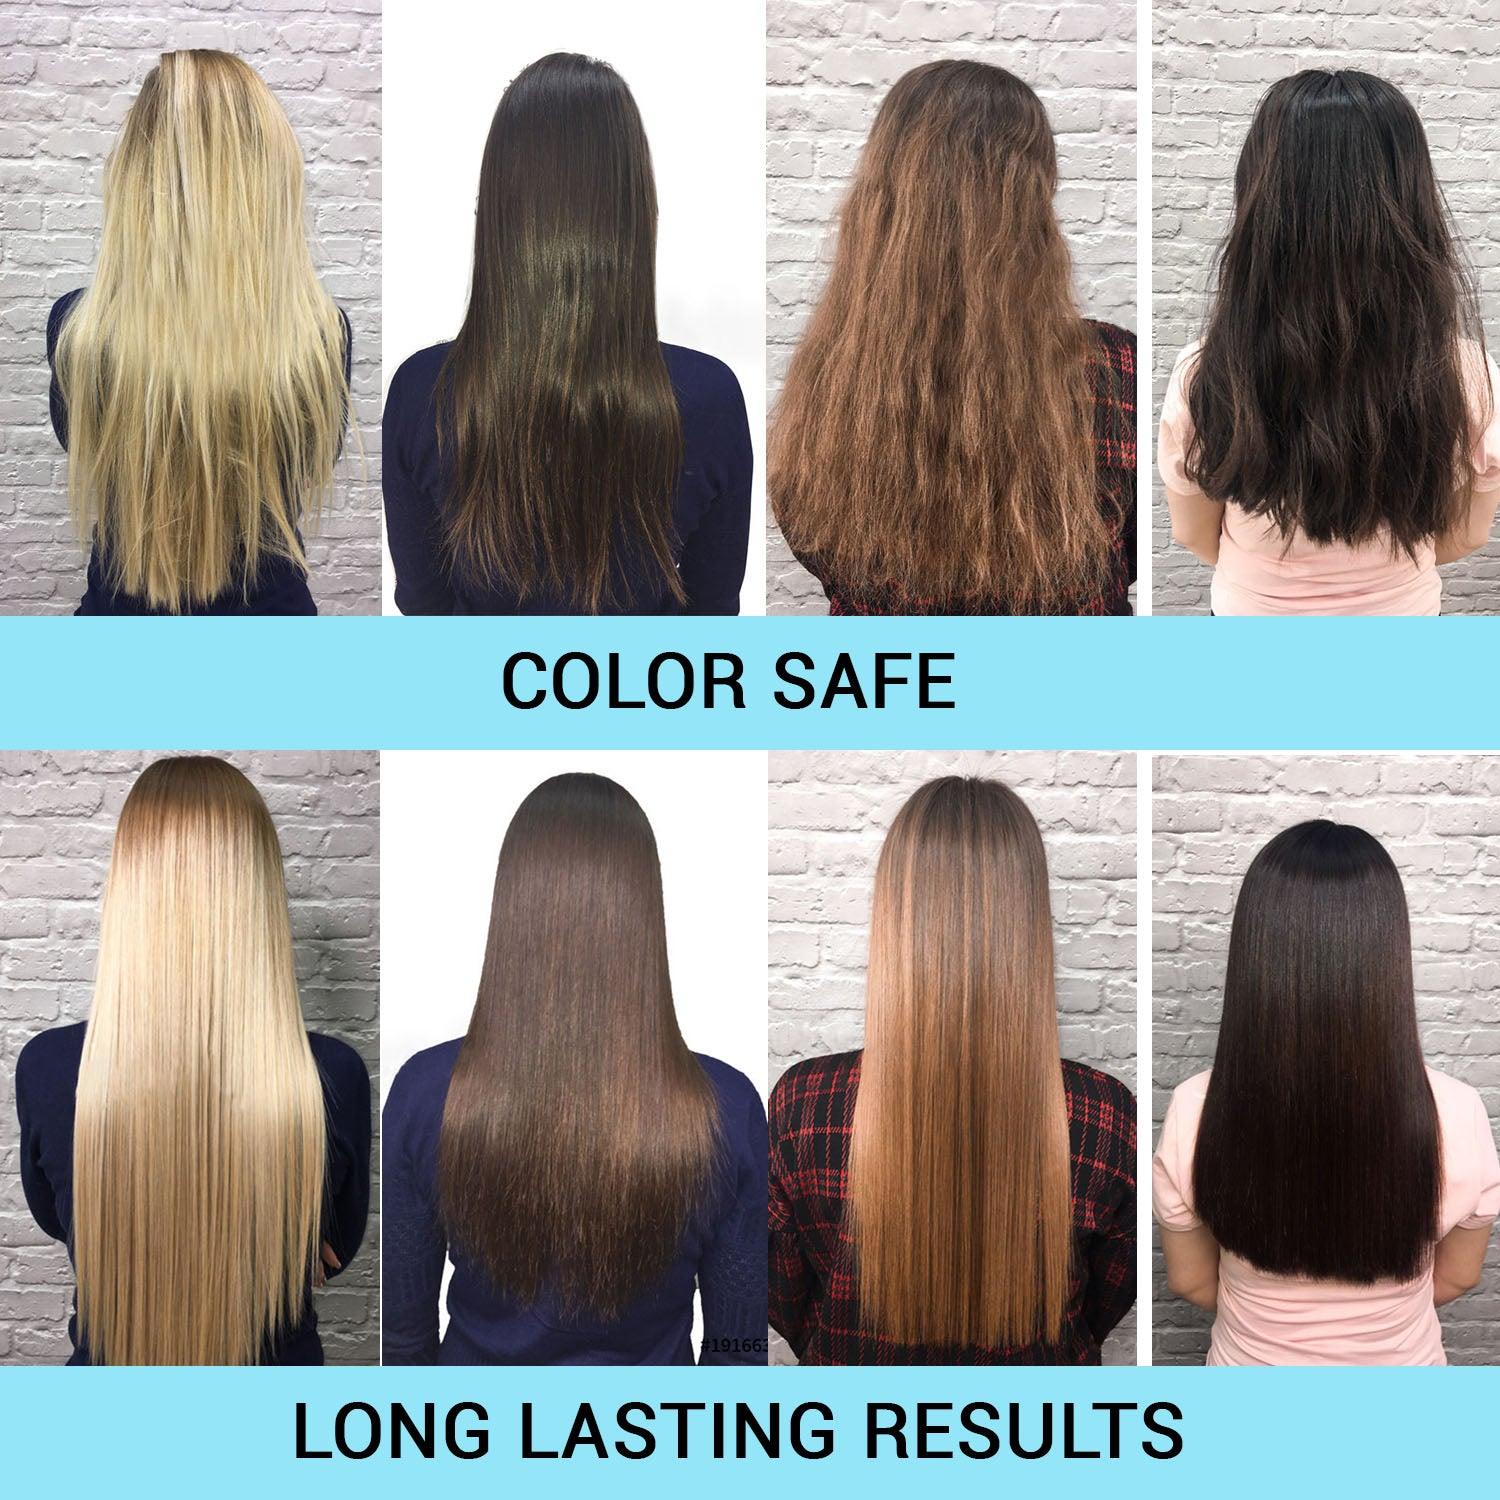 Keratin Hair Treatment-Brazilian Blowout Shampoo with Research Chemicals + Keratin Hair Treatment Straightening.  Kit For Silky, Smooth Hairs ( 2 Pasos ) 4 onzas - Amos Time Line Cosmetics